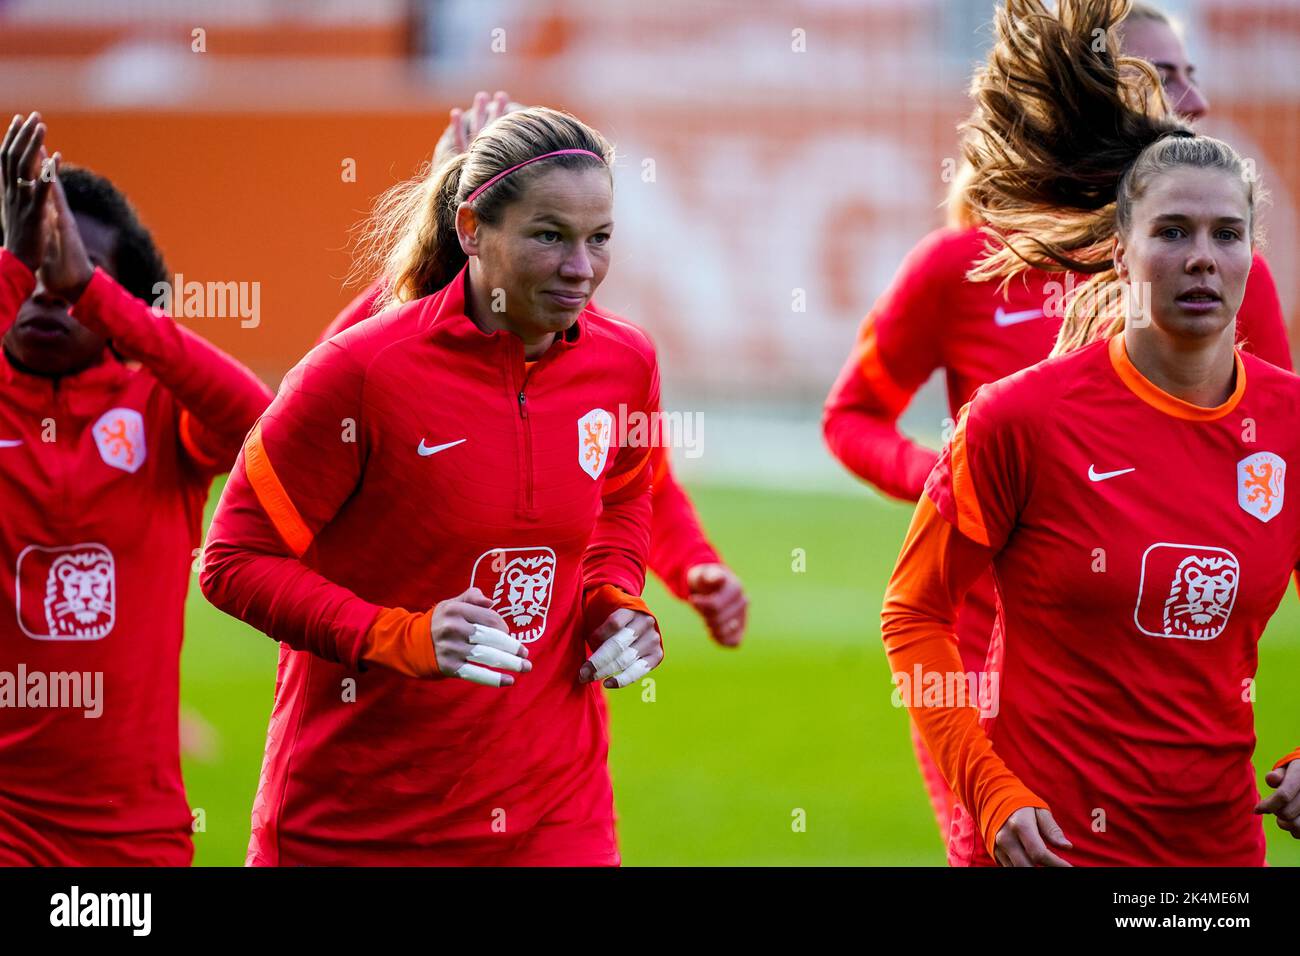 ZEIST, NETHERLANDS - OCTOBER 3: Barbara Lorsheyd of the Netherlands during a Training Session of the Netherlands Women’s Football Team at the KNVB Campus on October 3, 2022 in Zeist, Netherlands (Photo by Joris Verwijst/Orange Pictures) Stock Photo